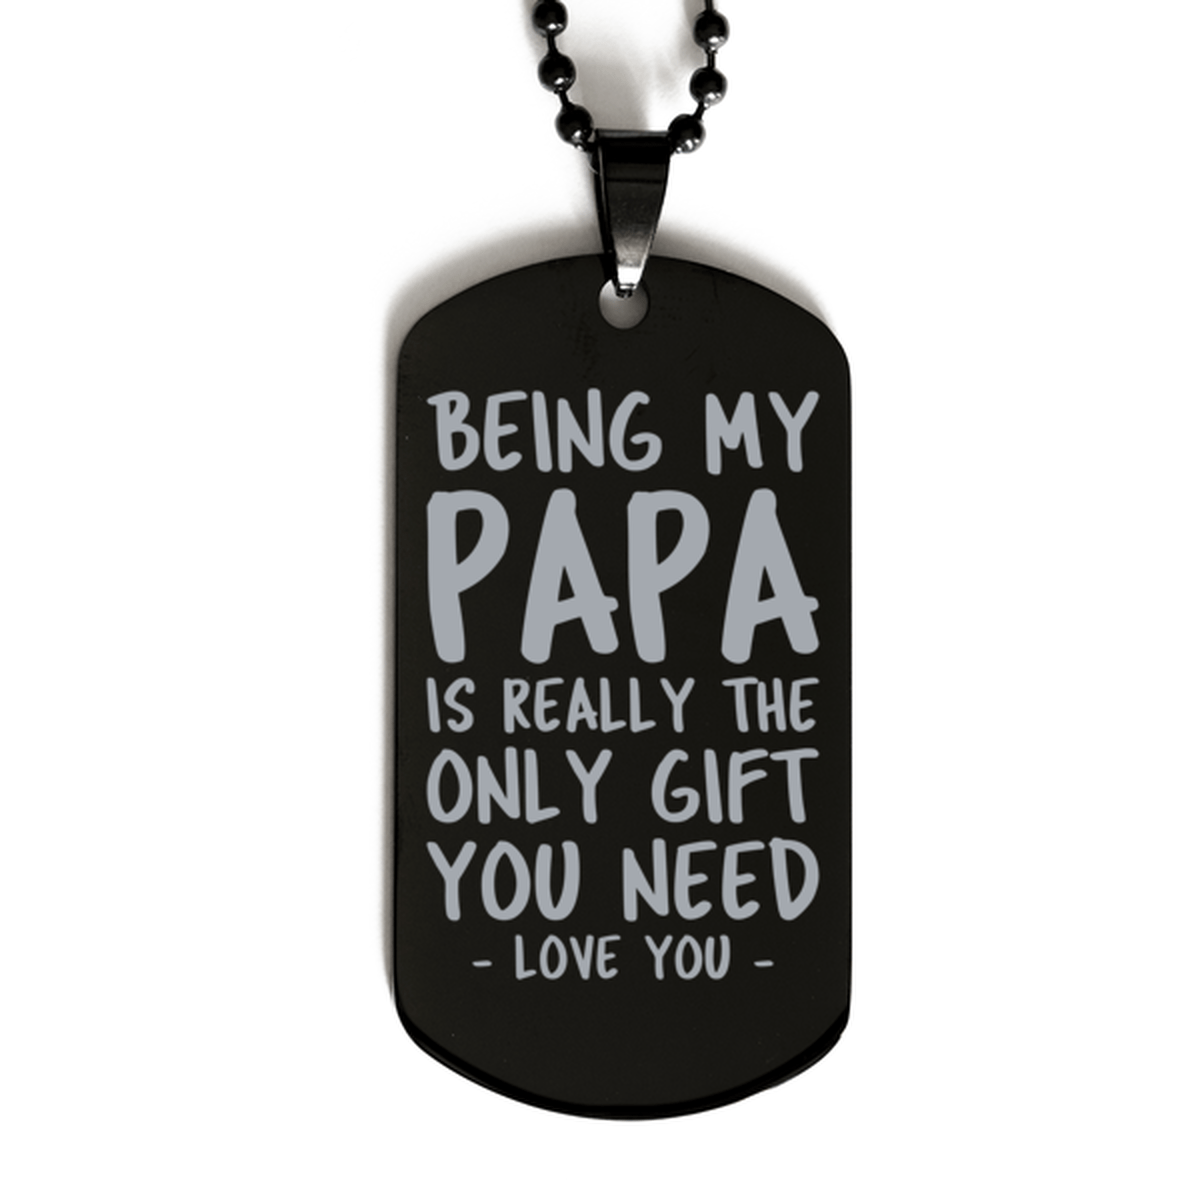 Funny Papa Black Dog Tag Necklace, Being My Papa Is Really the Only Gift You Need, Best Birthday Gifts for Papa